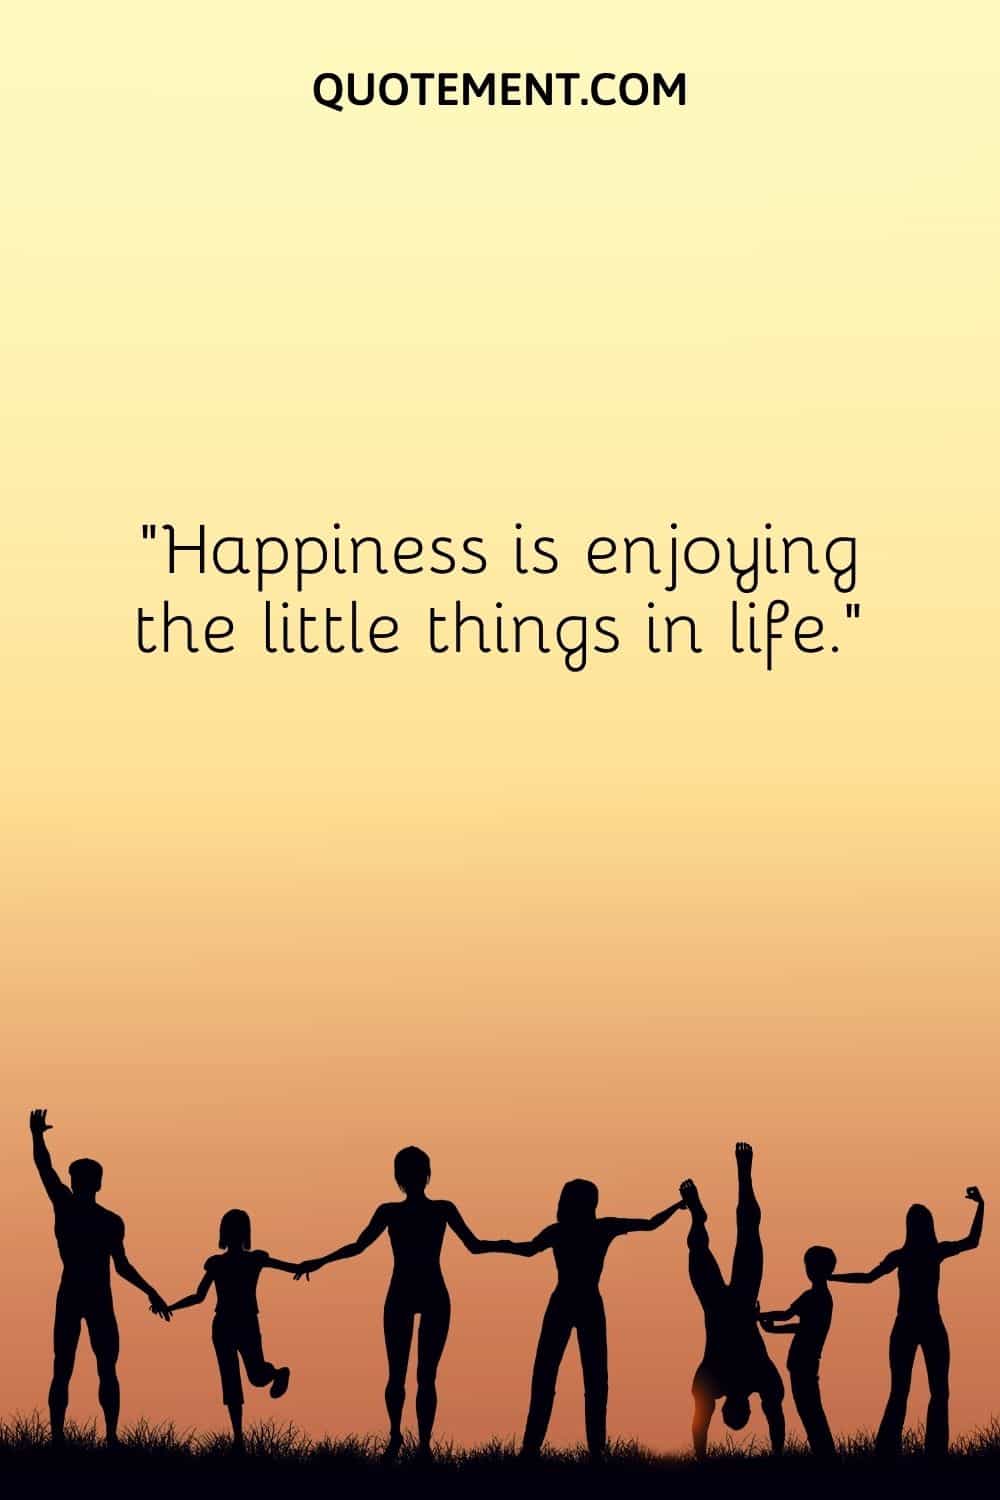 Happiness is enjoying the little things in life